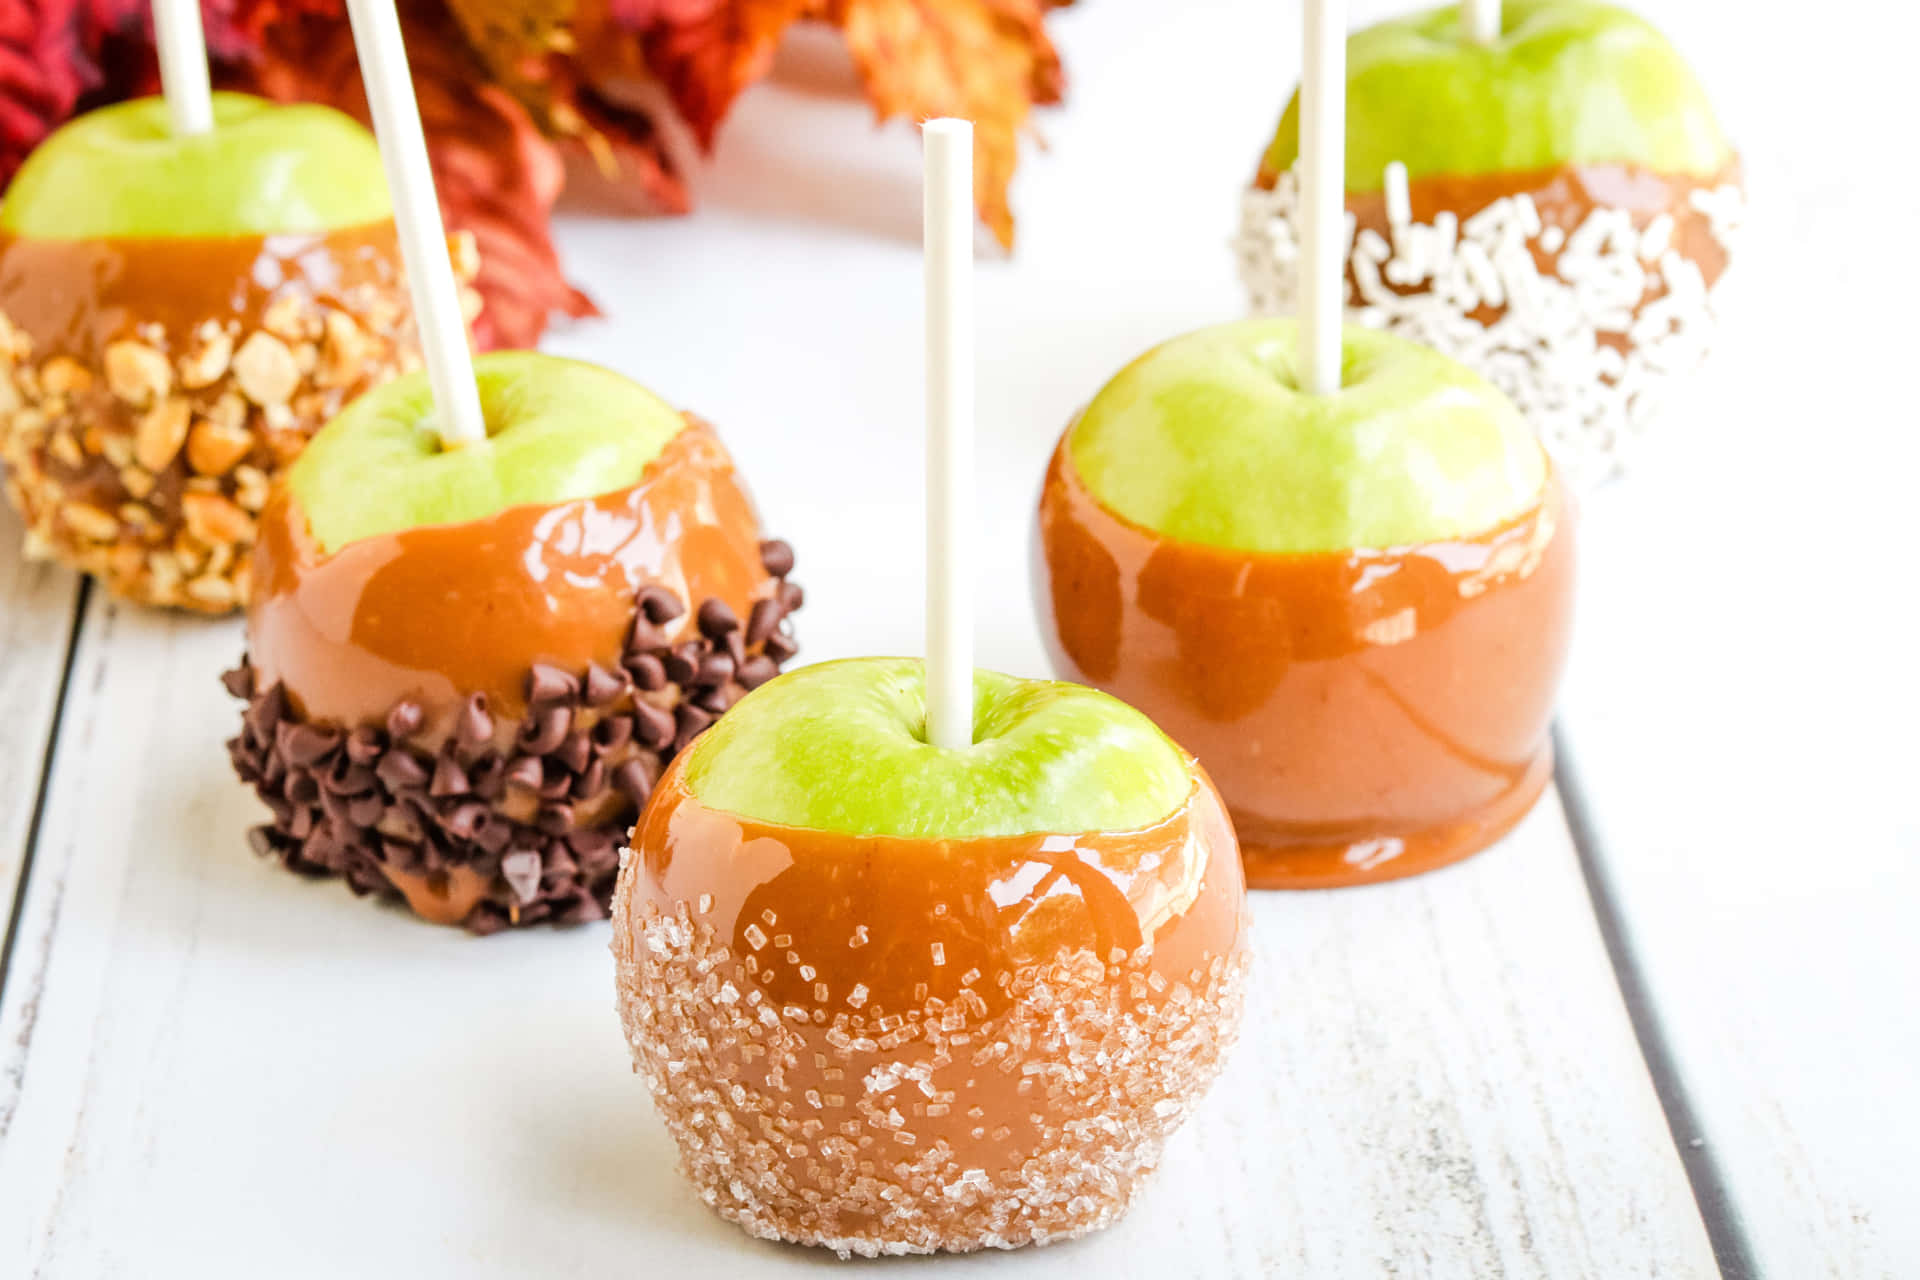 Delicious Caramel Apples on Rustic Wooden Table Wallpaper